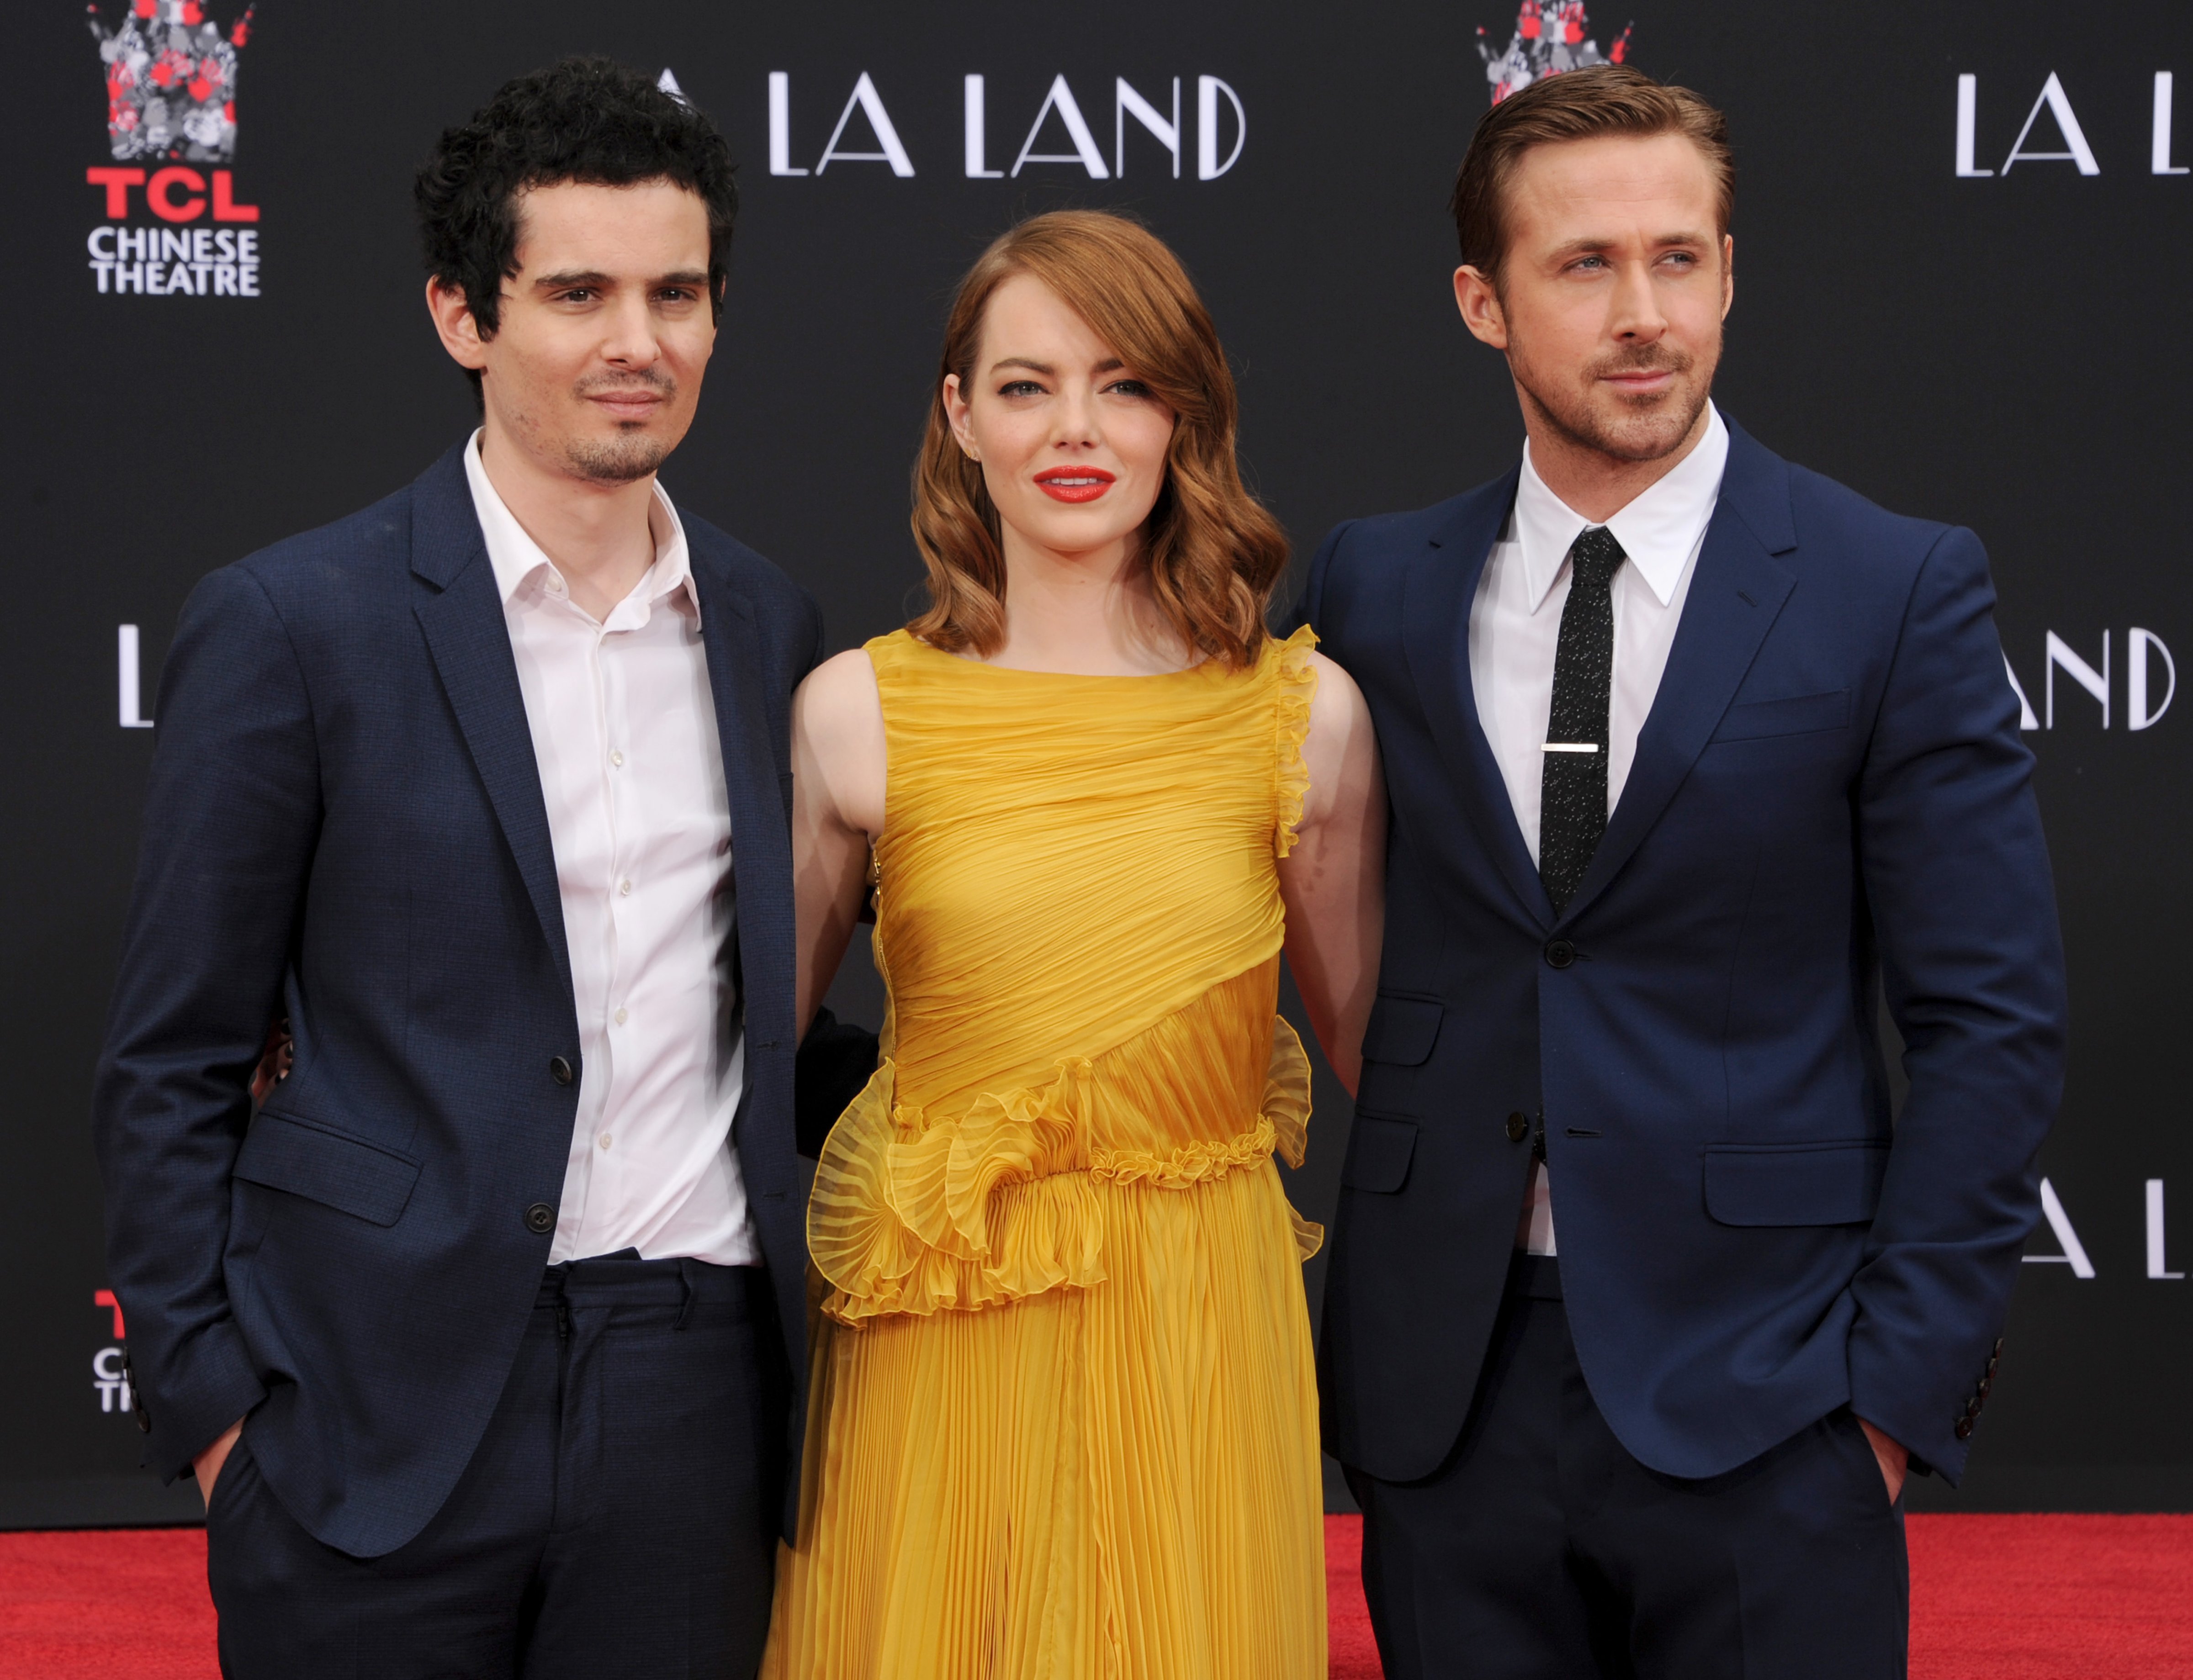 Director Damien Chazelle (L) and actors Emma Stone and Ryan Gosling who are honored with a Hand and Footprint Ceremony at TCL Chinese Theatre IMAX on behalf of Lionsgate's LA LA LAND on December 7, 2016. (Gregg DeGuire&mdash;Getty Images)